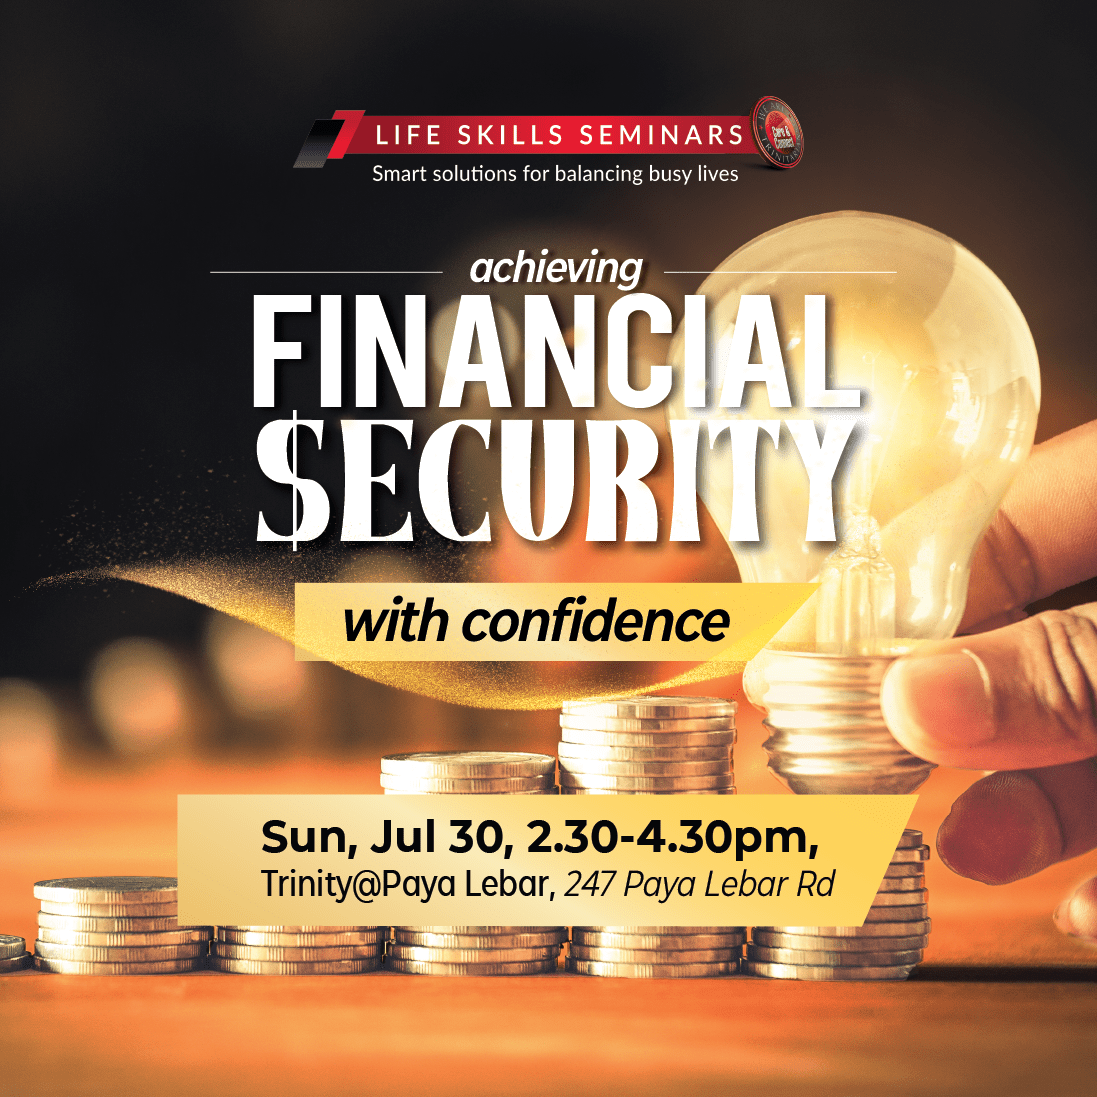 Life Skills Seminar: Achieving Financial Security with Confidence